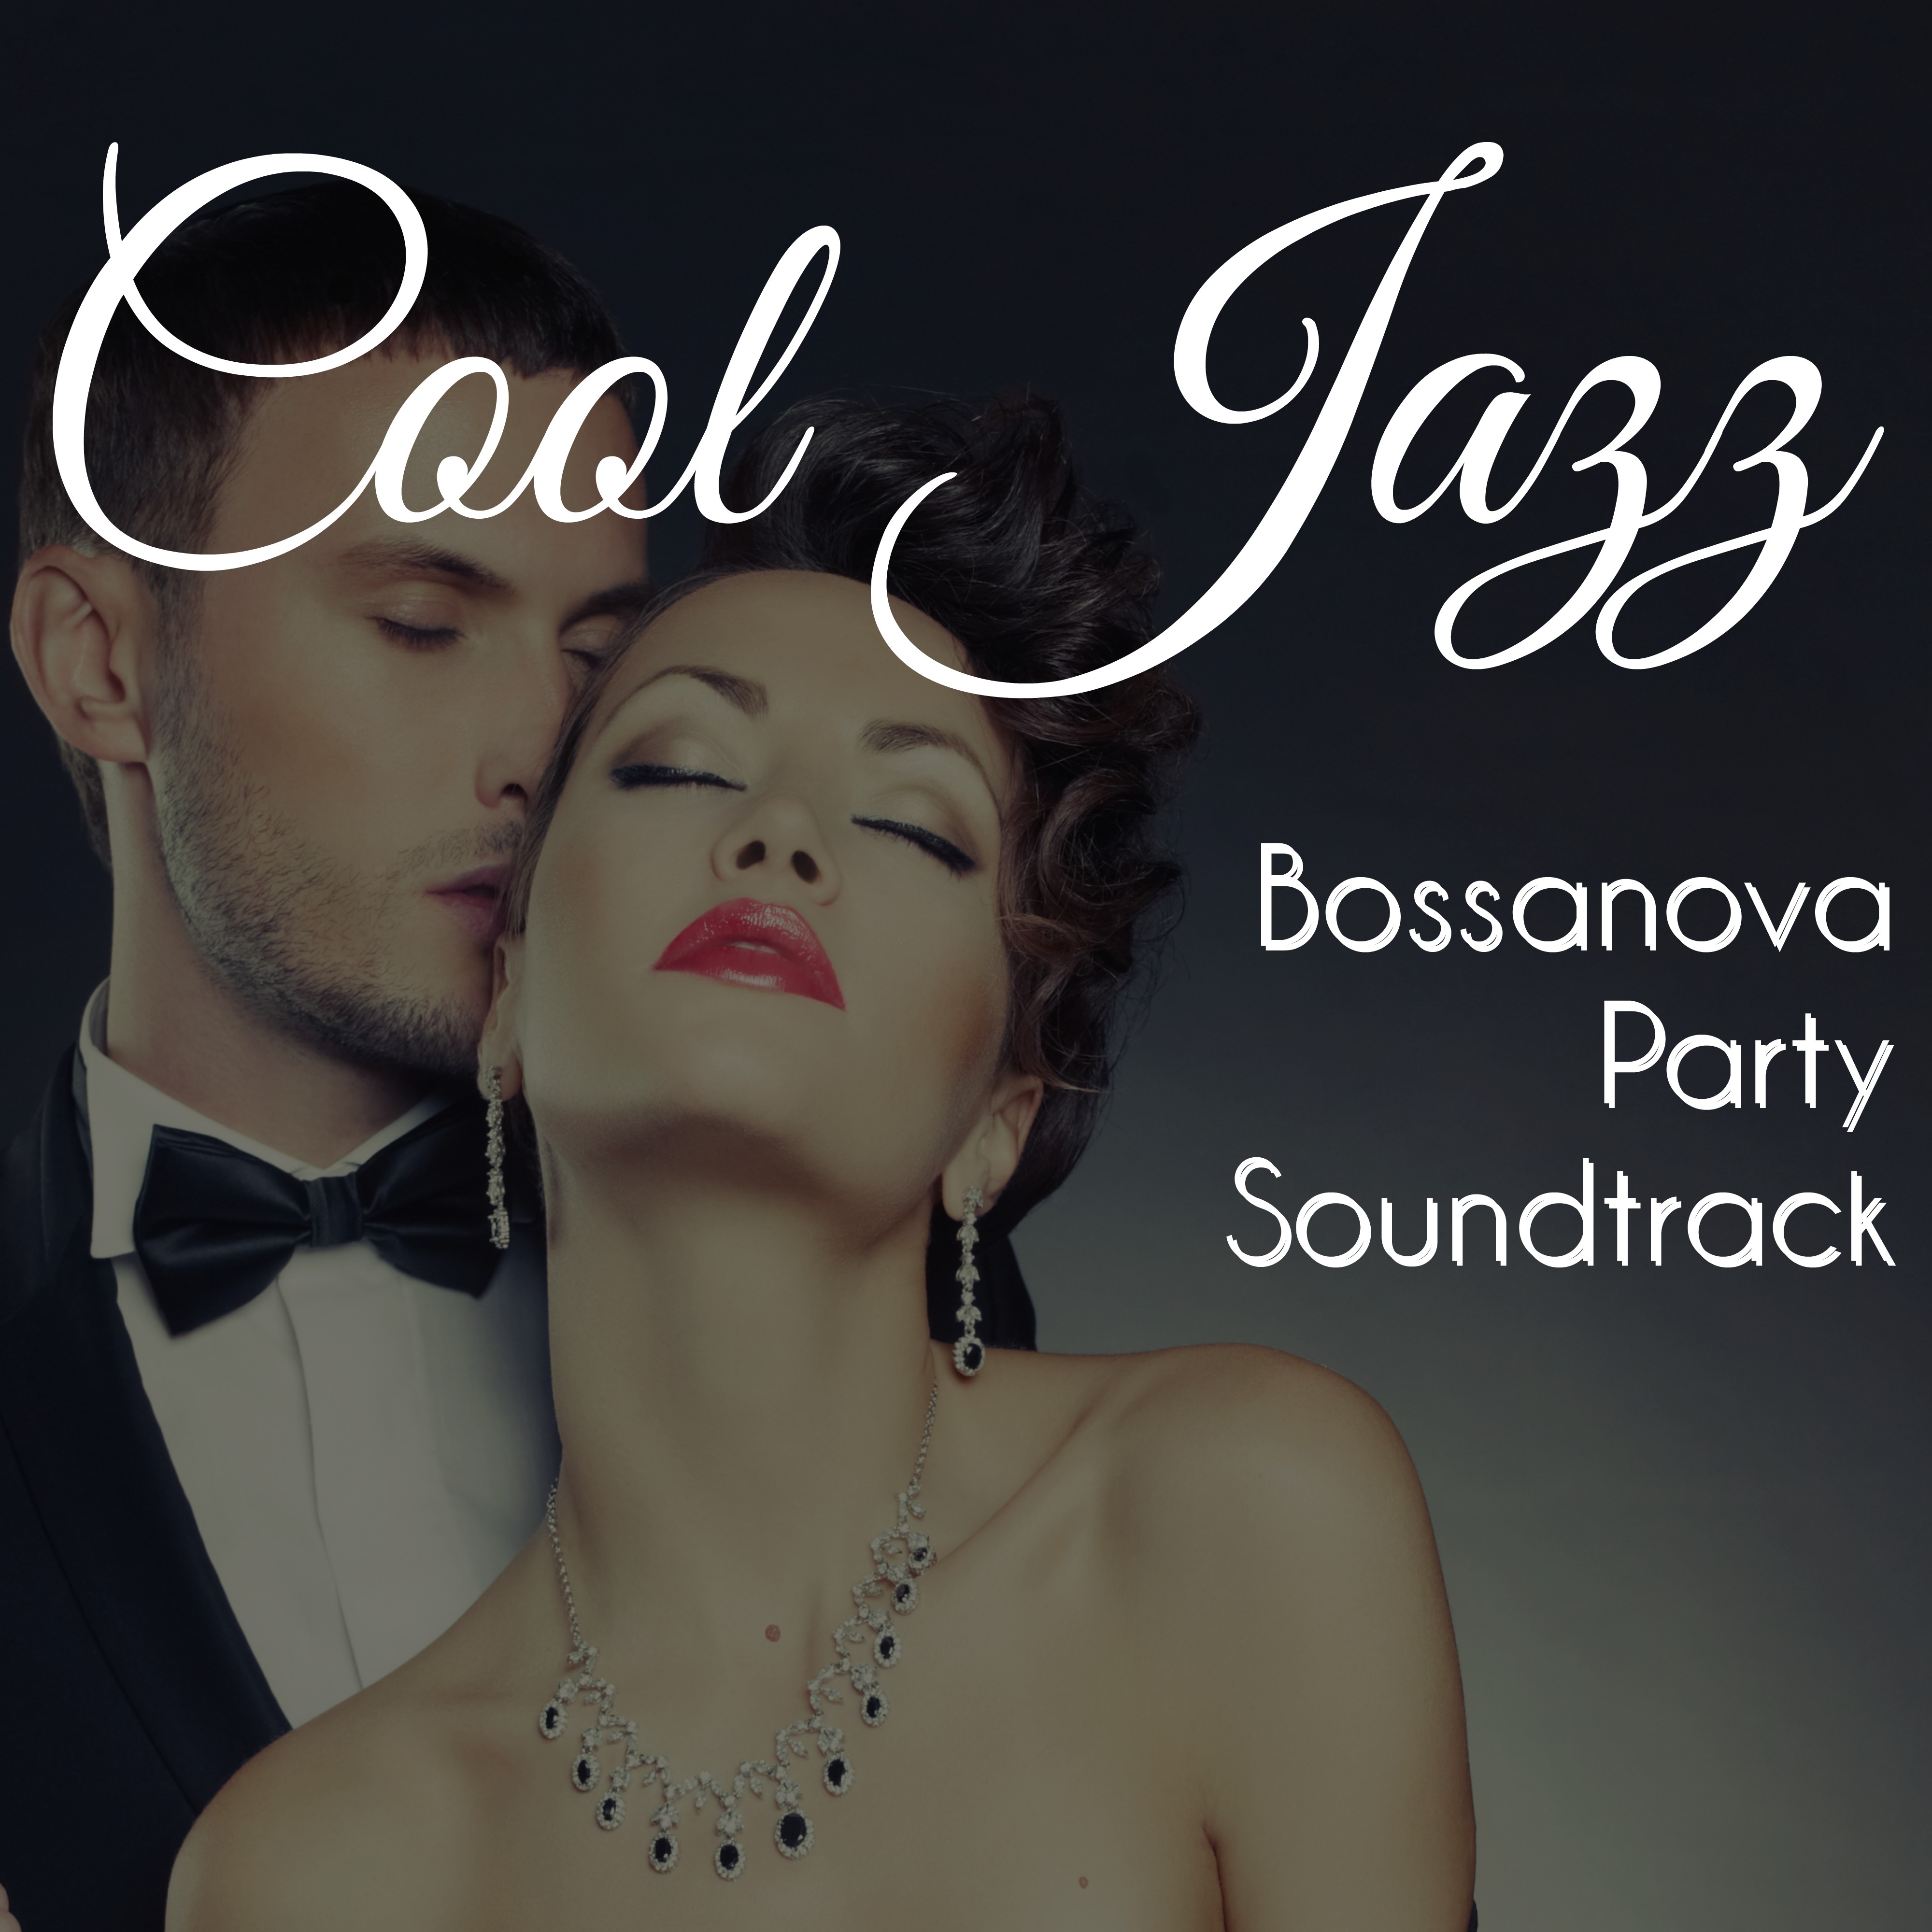 Cool Jazz – Bossanova Party Soundtrack, Smooth Jazz & Blues, Cocktail and Dinner Music